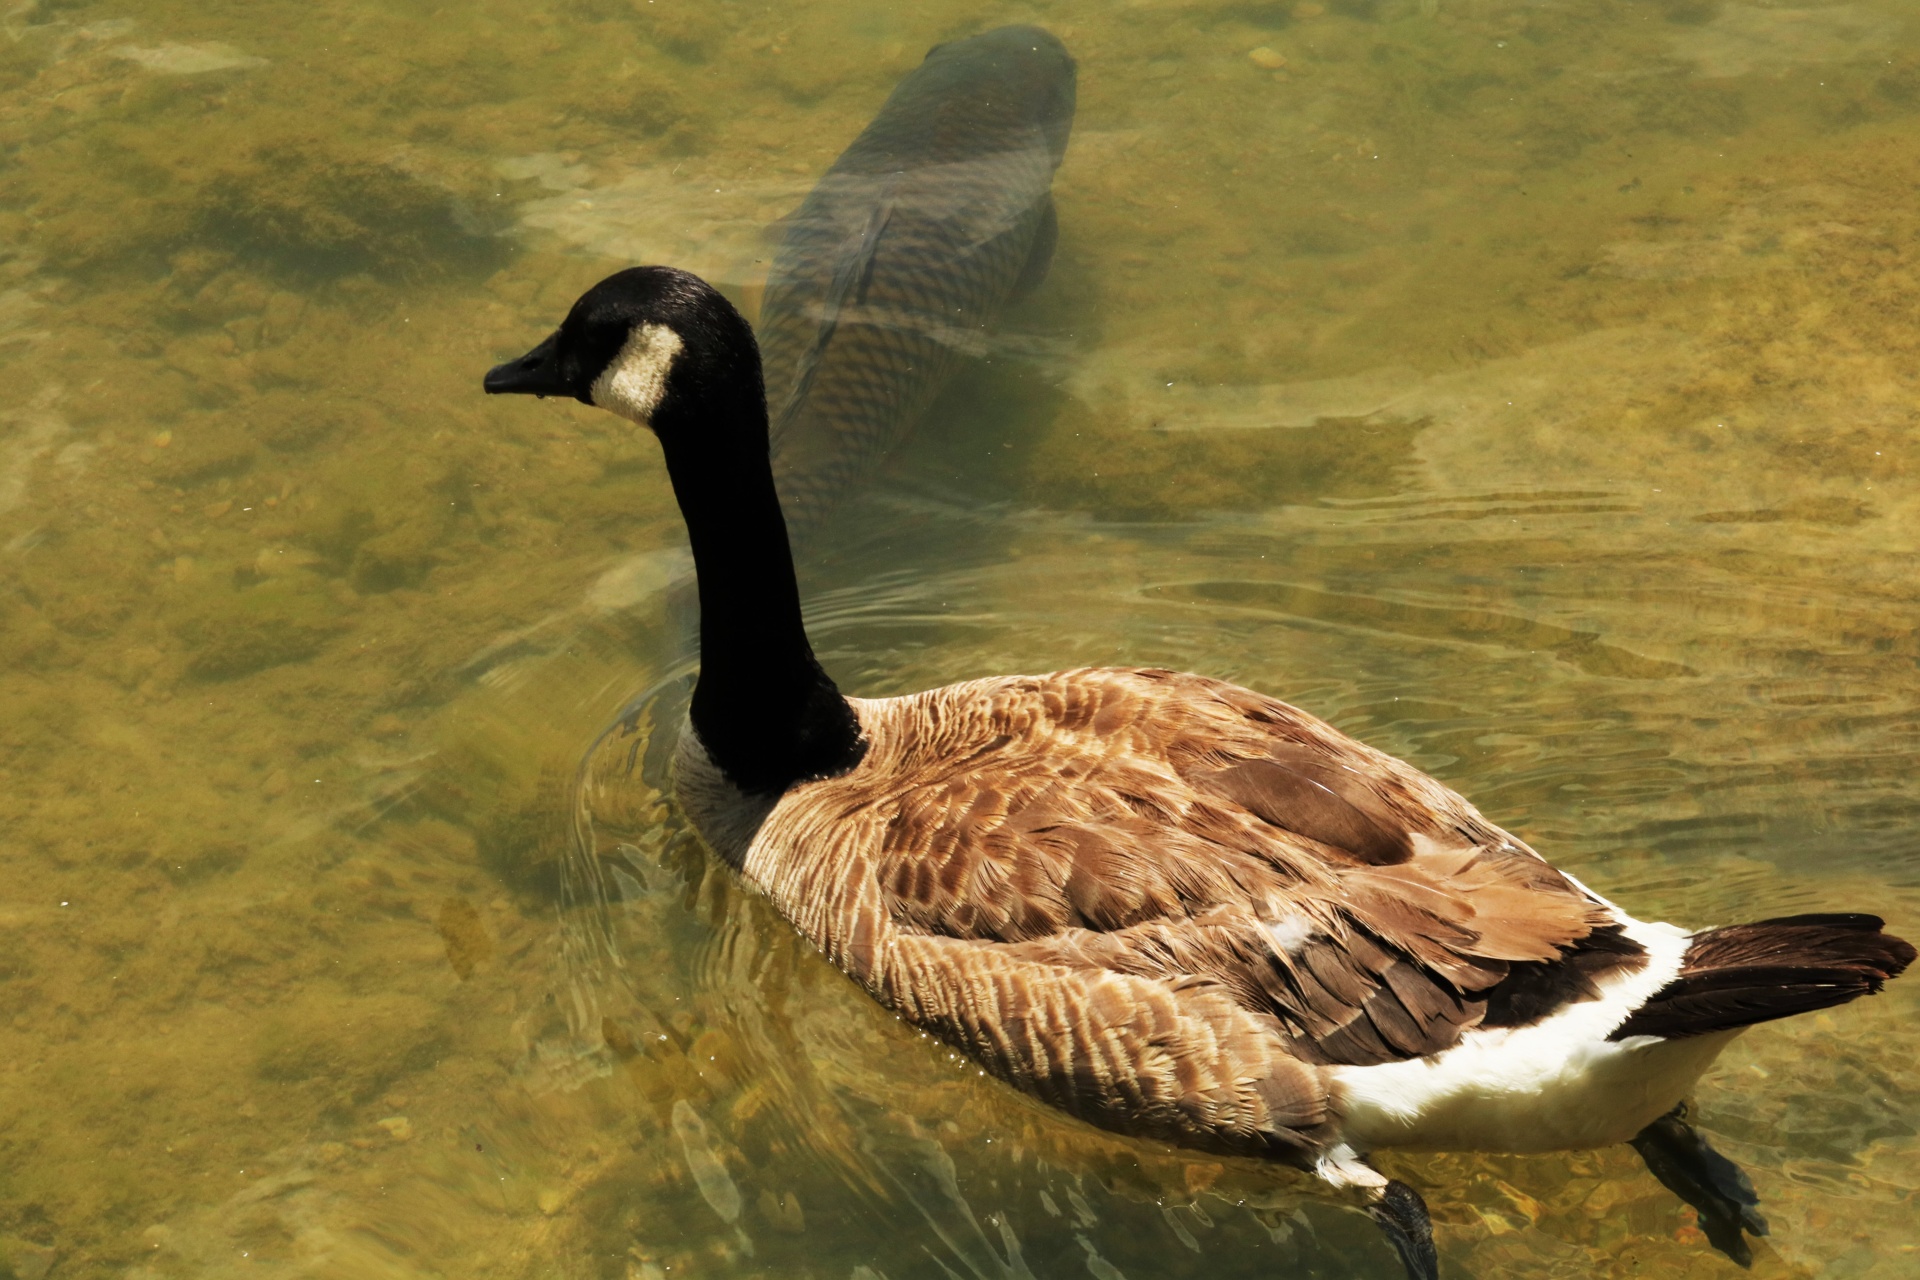 Canada Goose And Fish In Lake 2